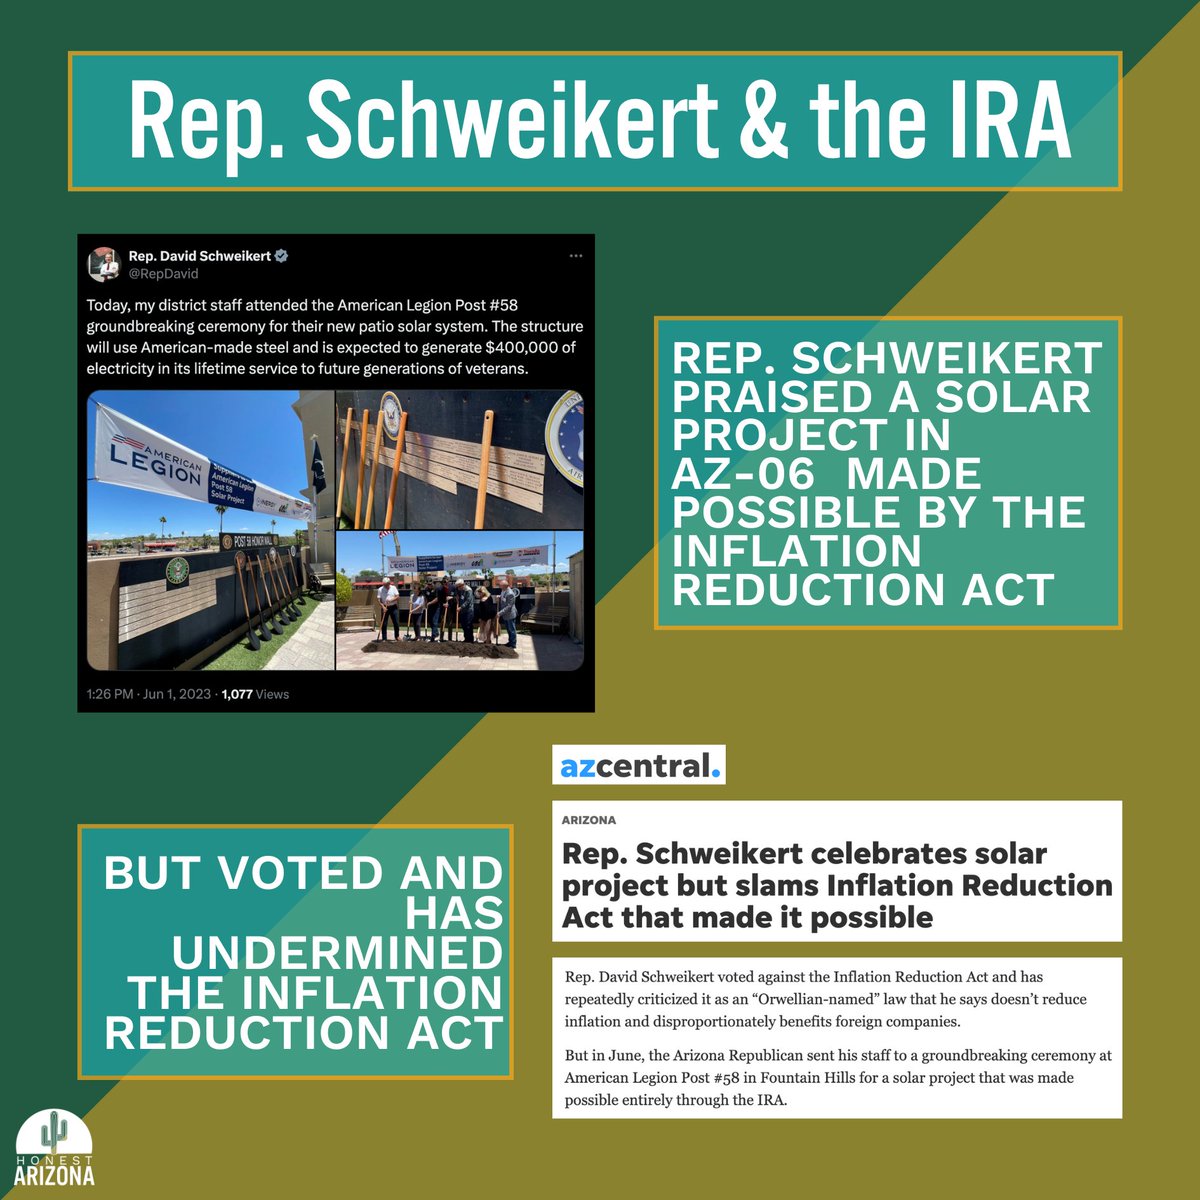 Even Rep. Schweikert, a leading opponent of the Inflation Reduction Act, knows the Inflation Reduction Act is benefitting #AZ01 😉